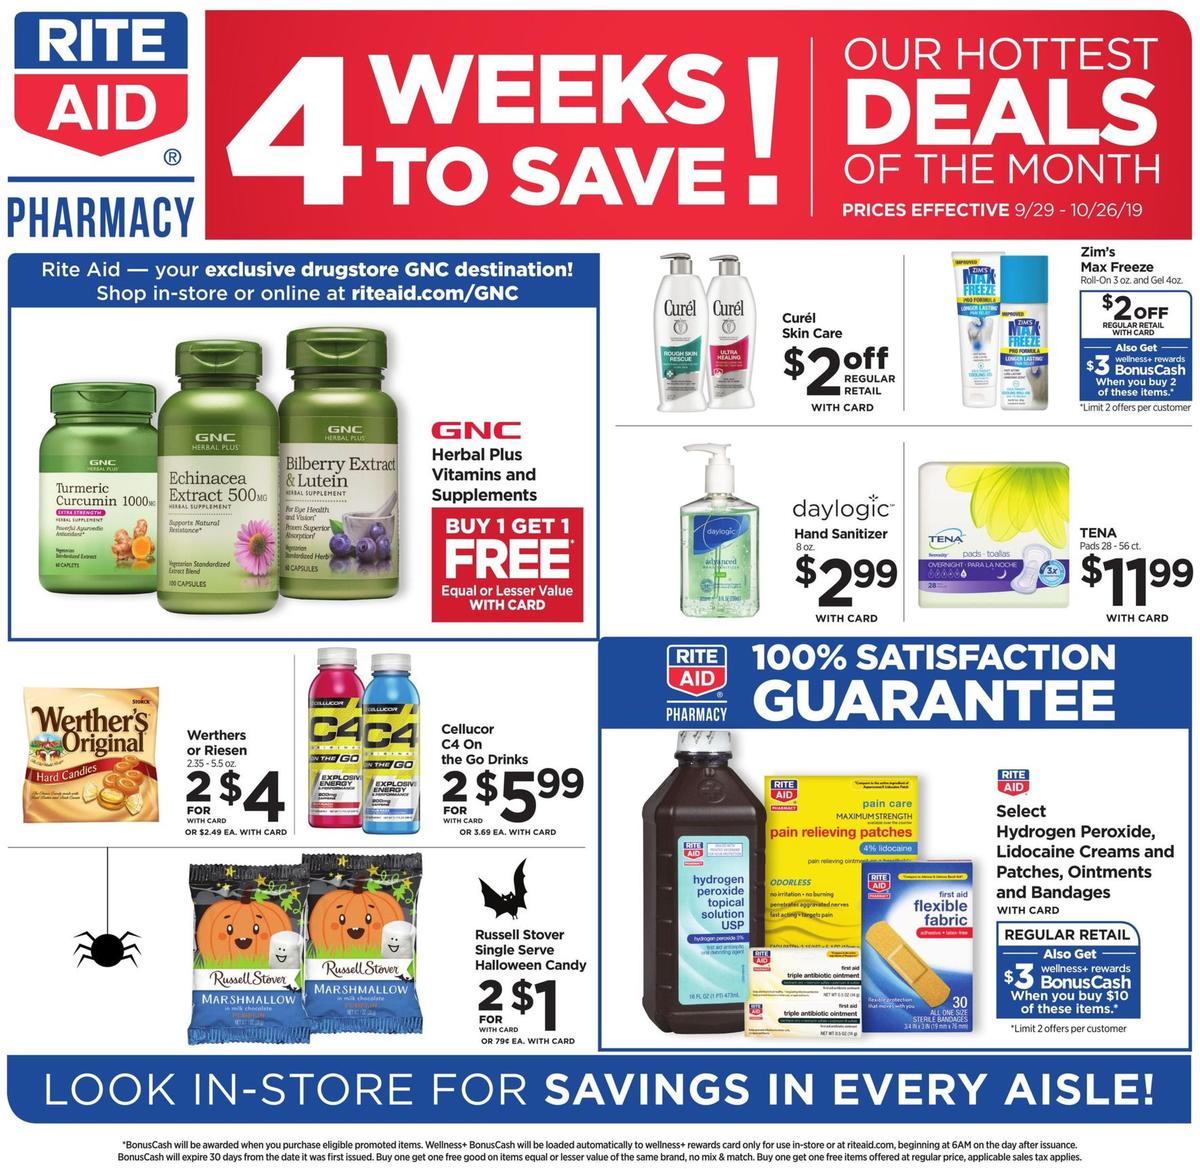 Rite Aid 4 Weeks to Save! Weekly Ad from September 29